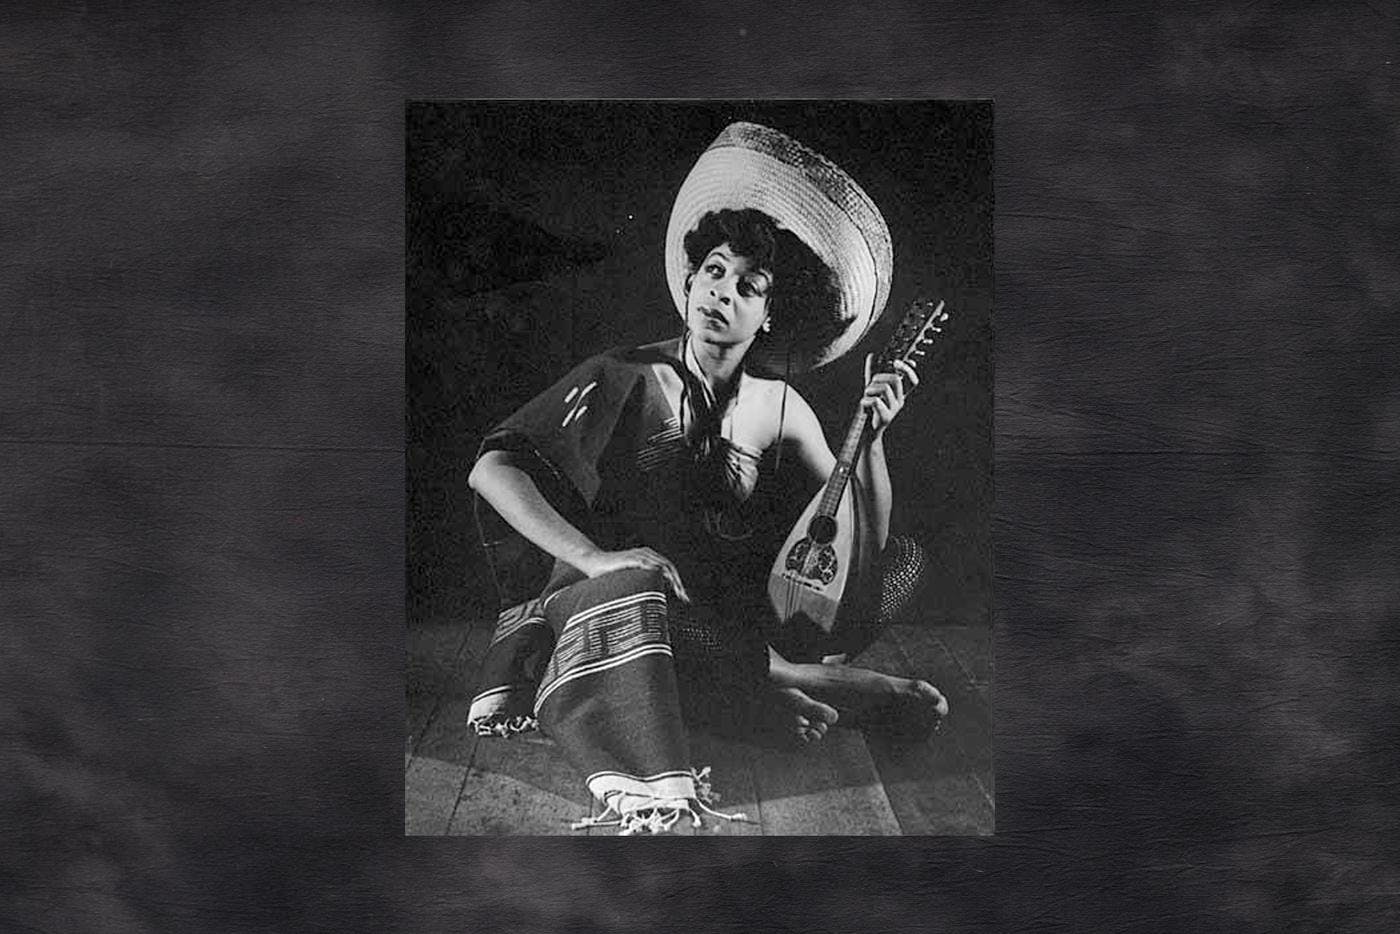 A black and white photo of a woman sitting down and holding a mandolin